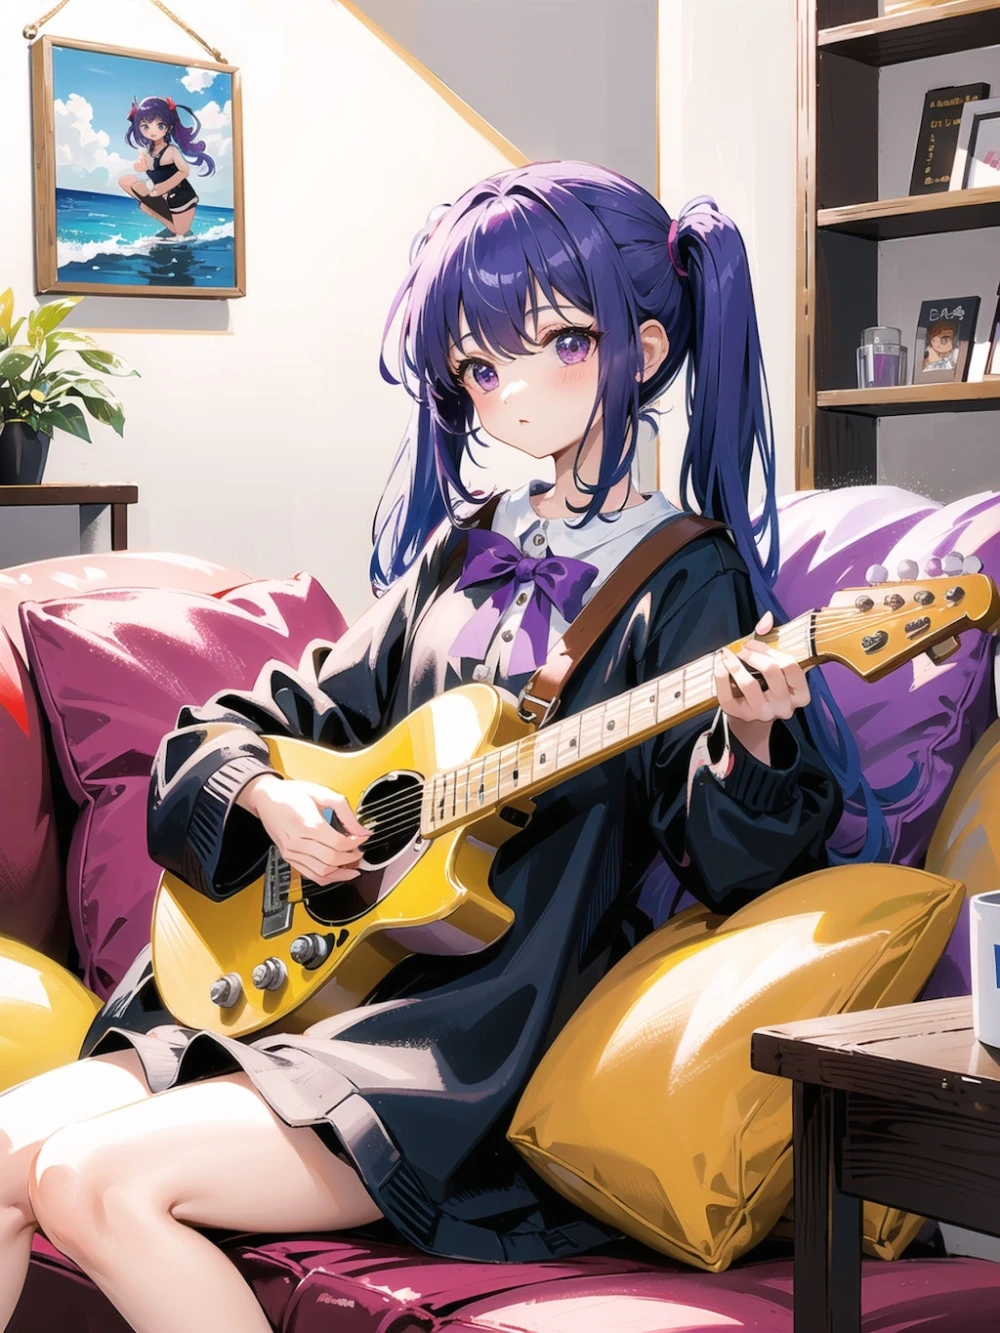 guitar-anime-style-all-ages-9